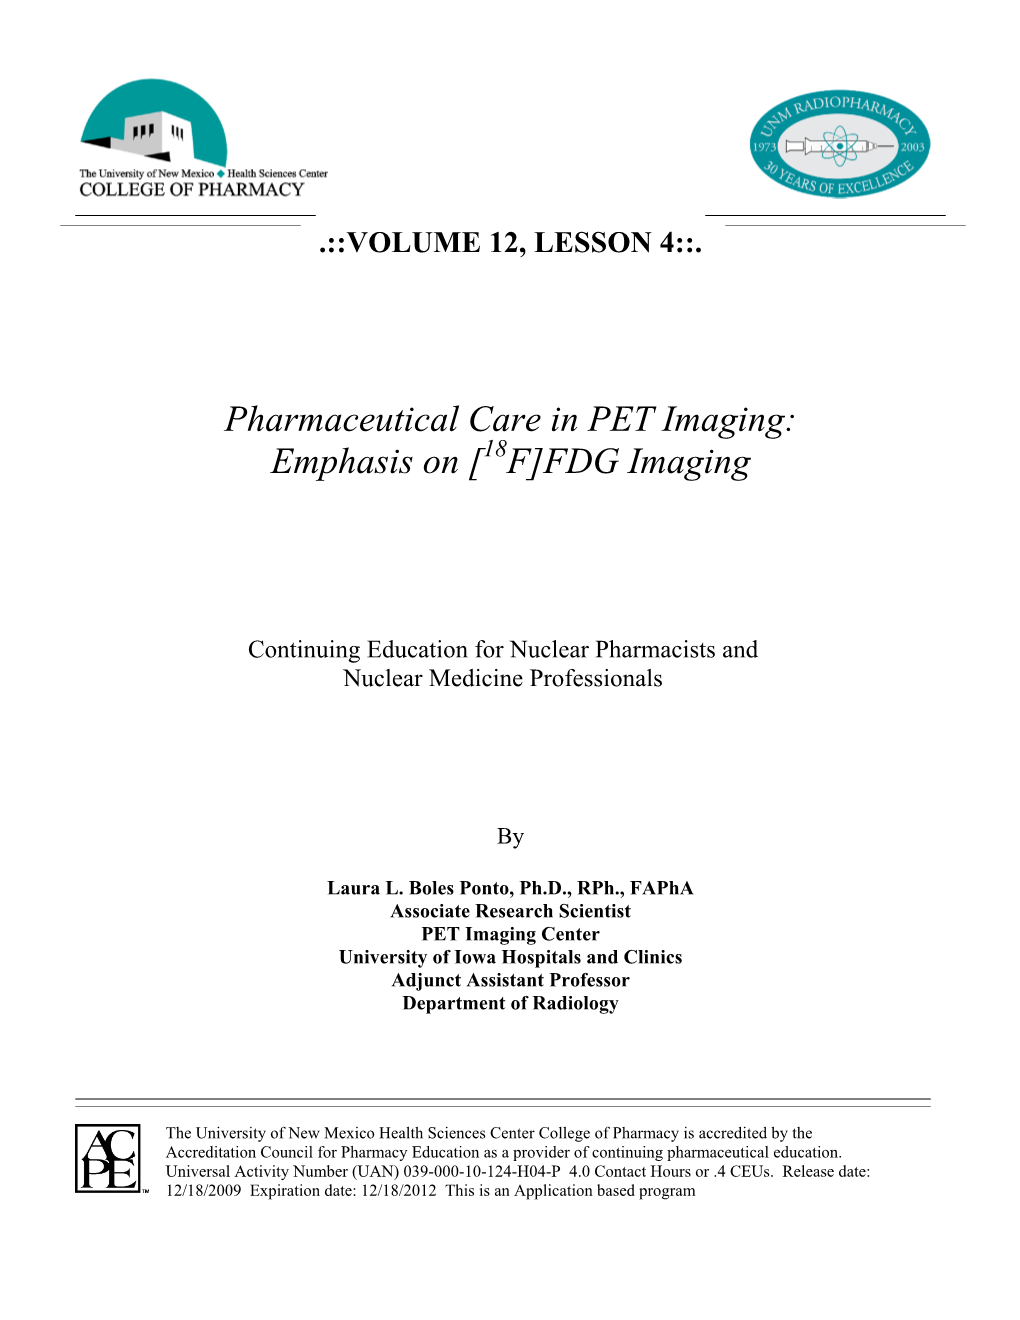 Pharmaceutical Care in PET Imaging: Emphasis on [ F]FDG Imaging